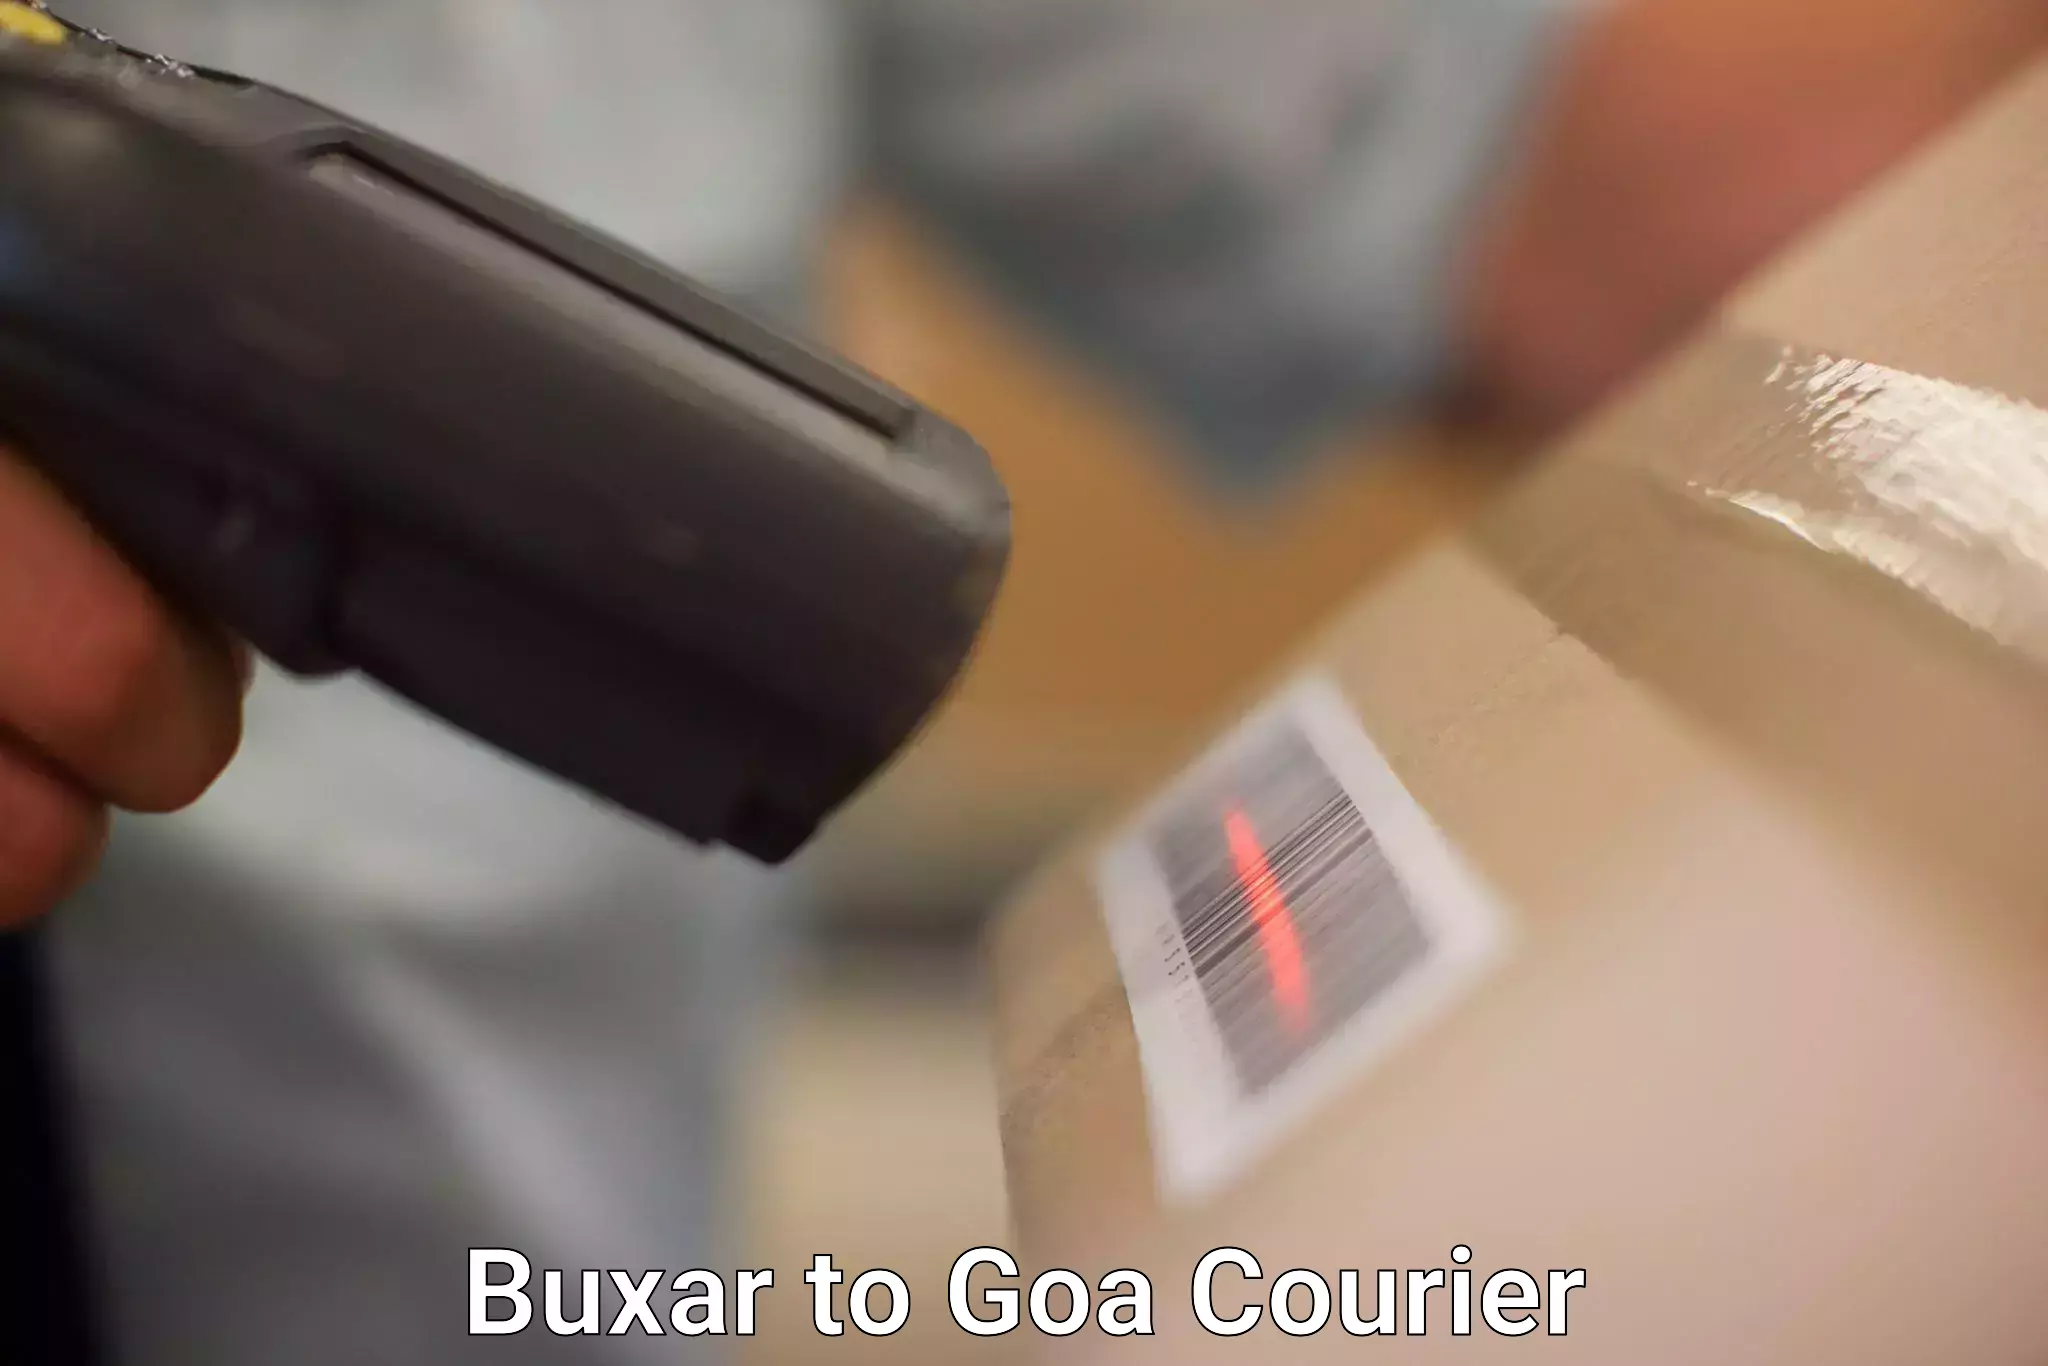 Same-day delivery solutions Buxar to Panaji